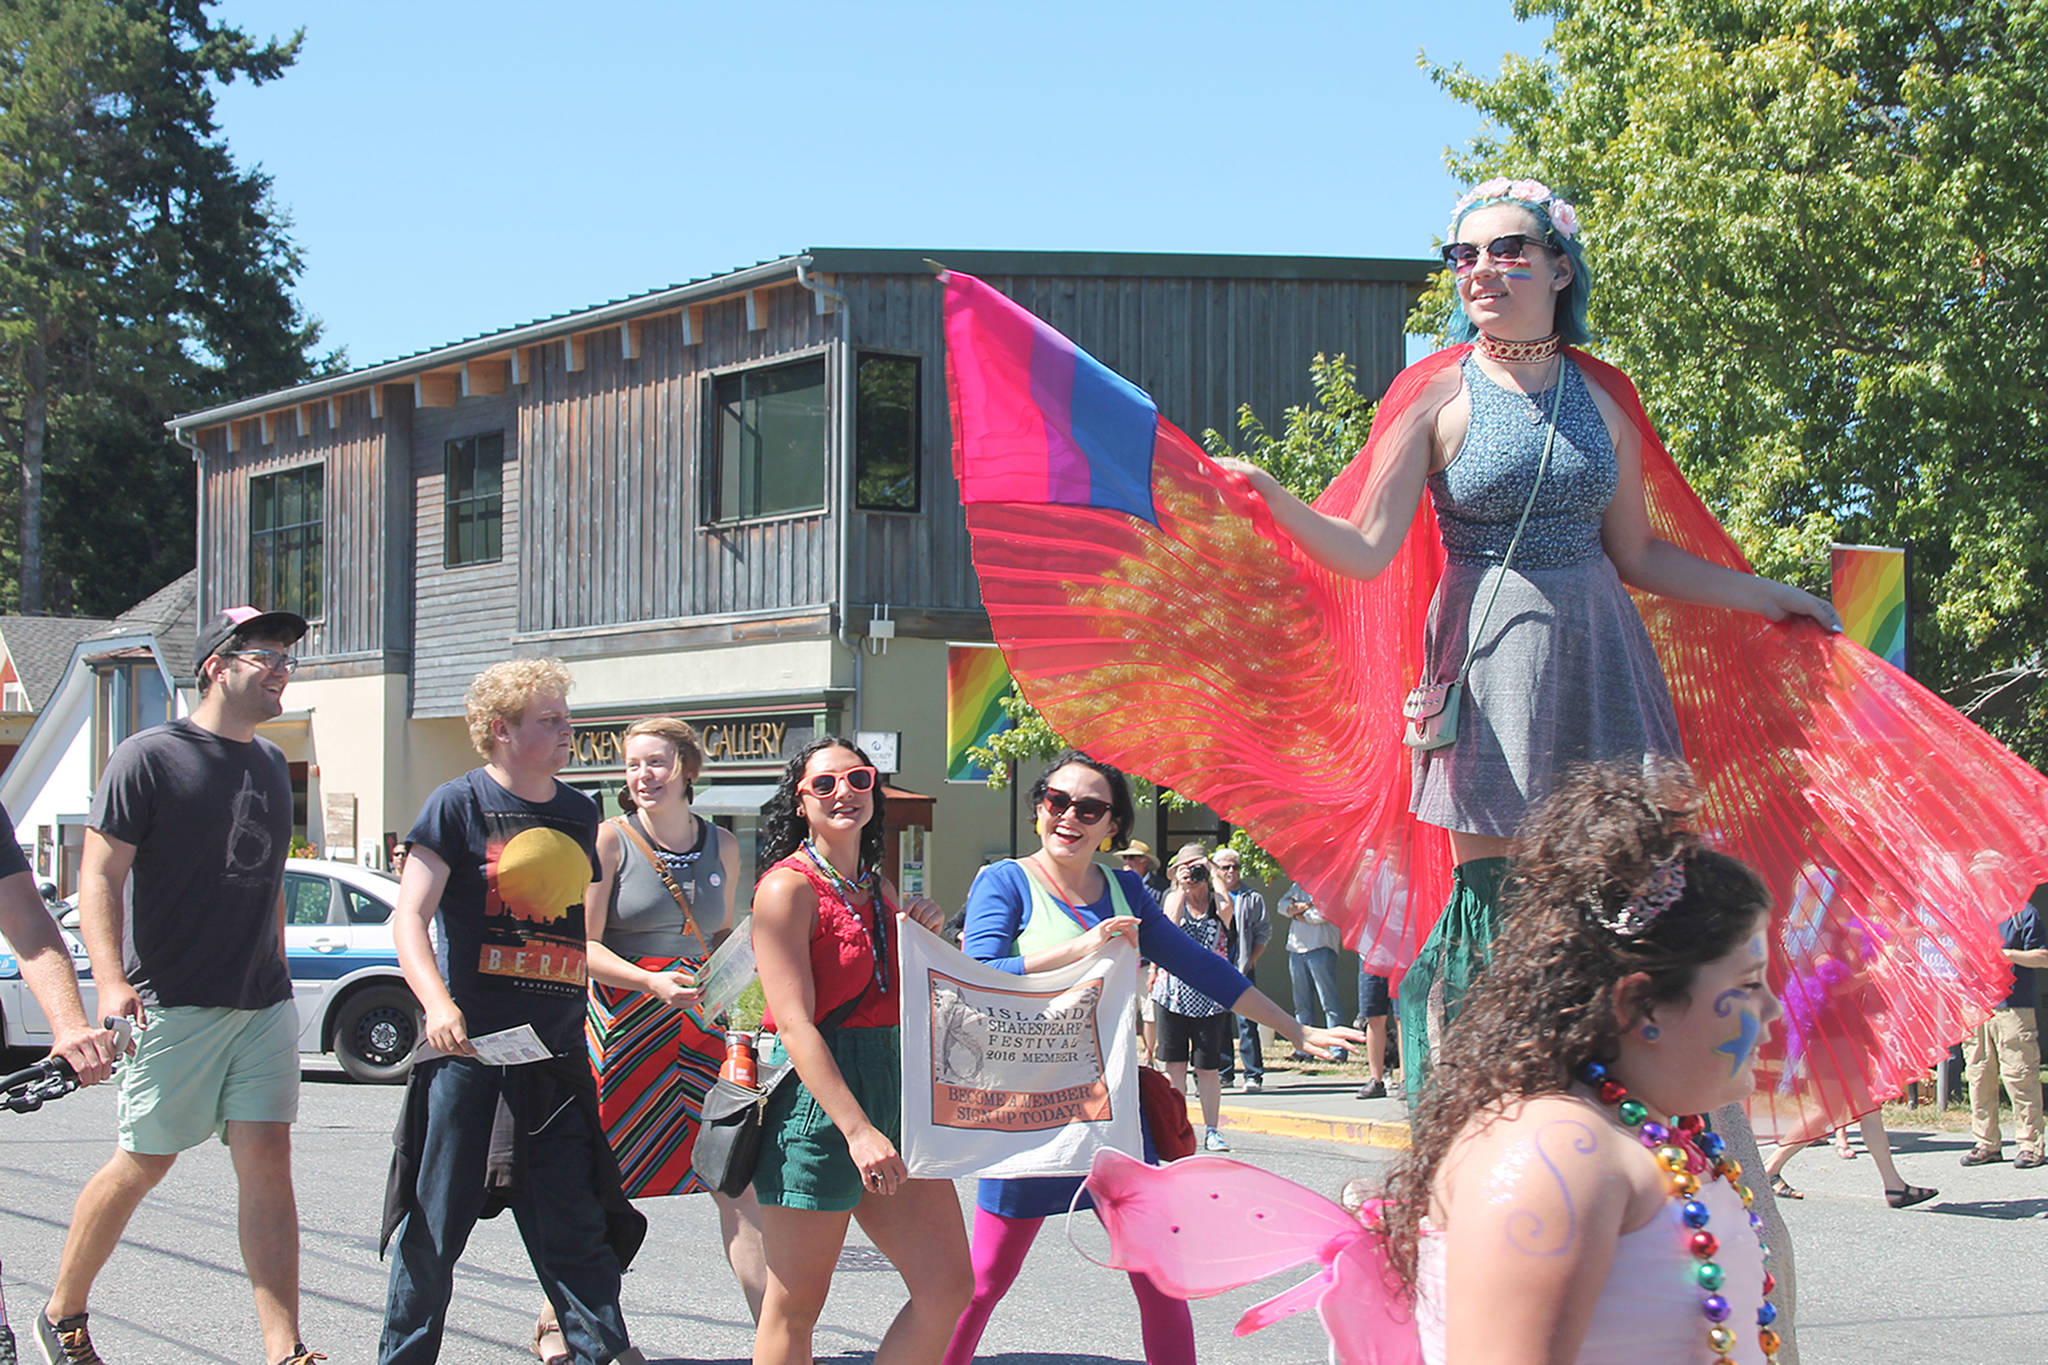 Queer Pride Parade set for Sunday afternoon in downtown Langley